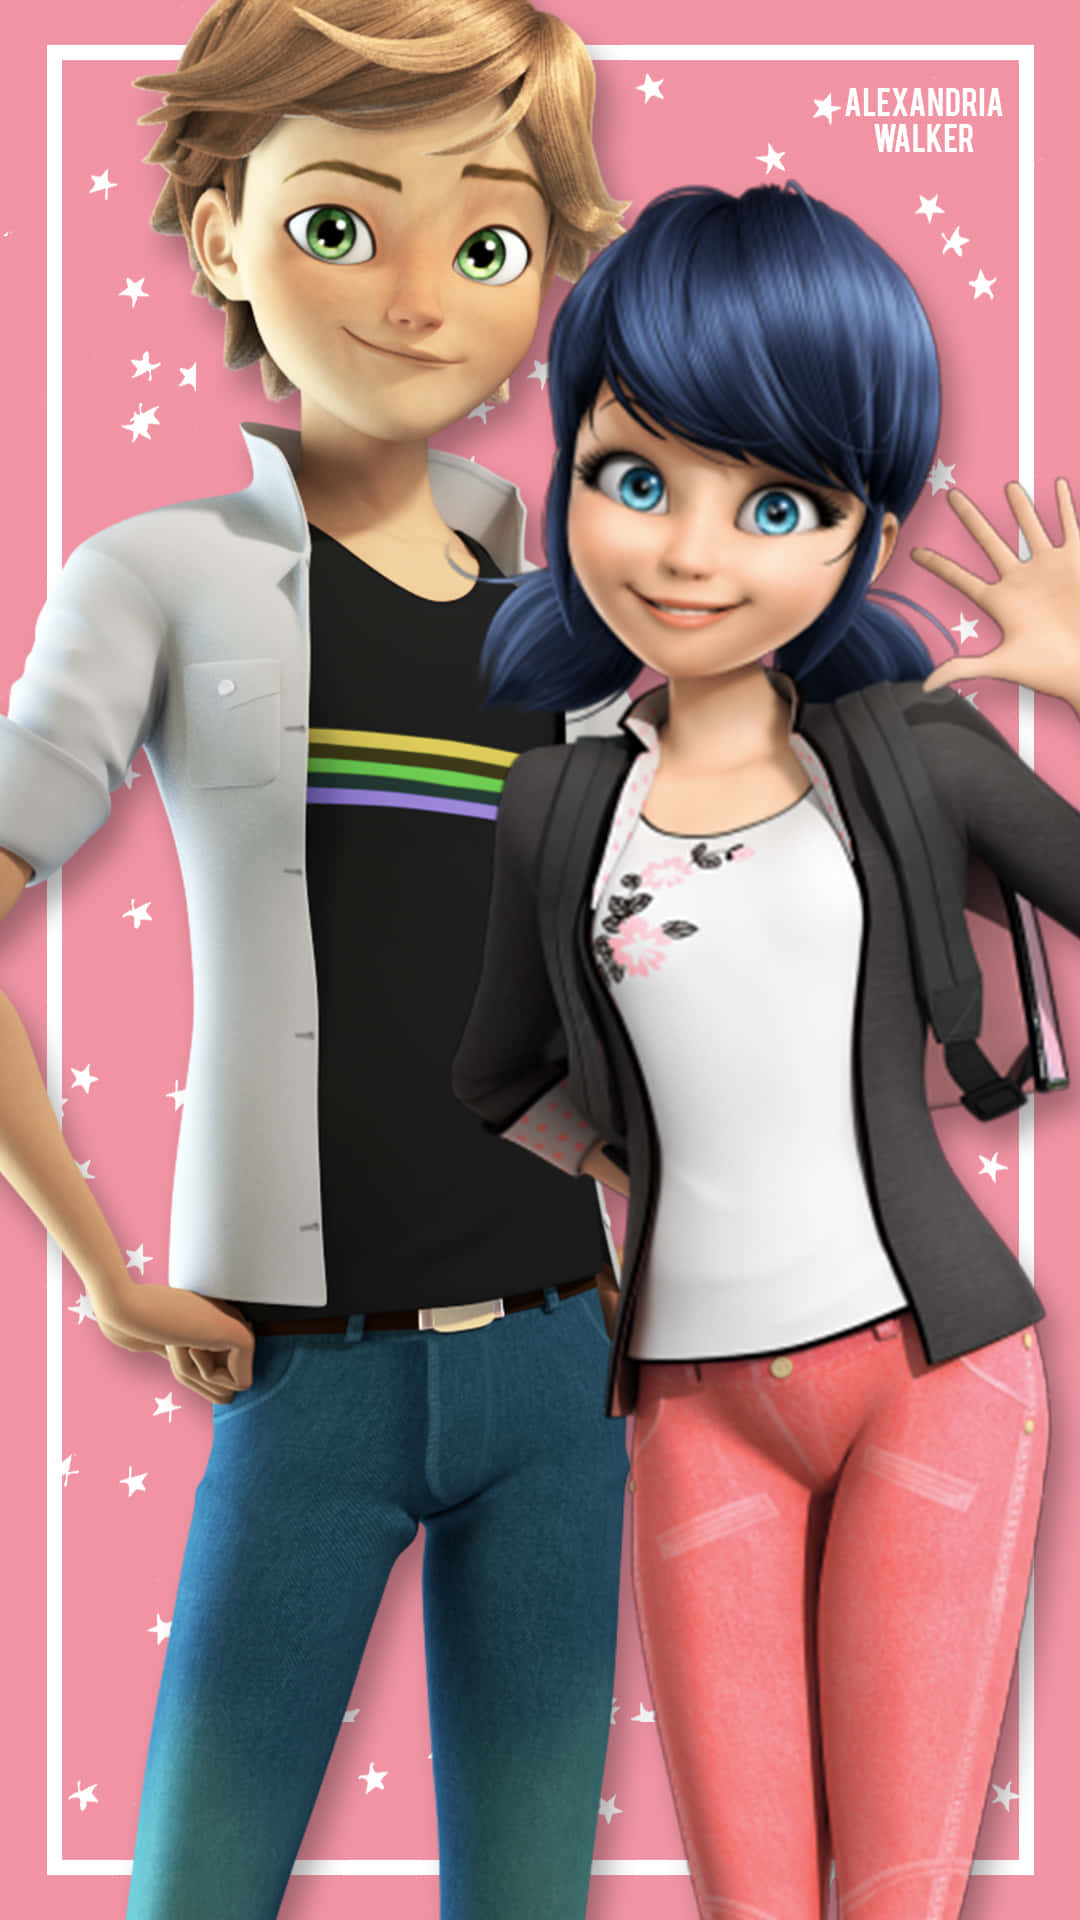 Marinette and Adrien, stars of the hit series "Miraculous Ladybug." Wallpaper